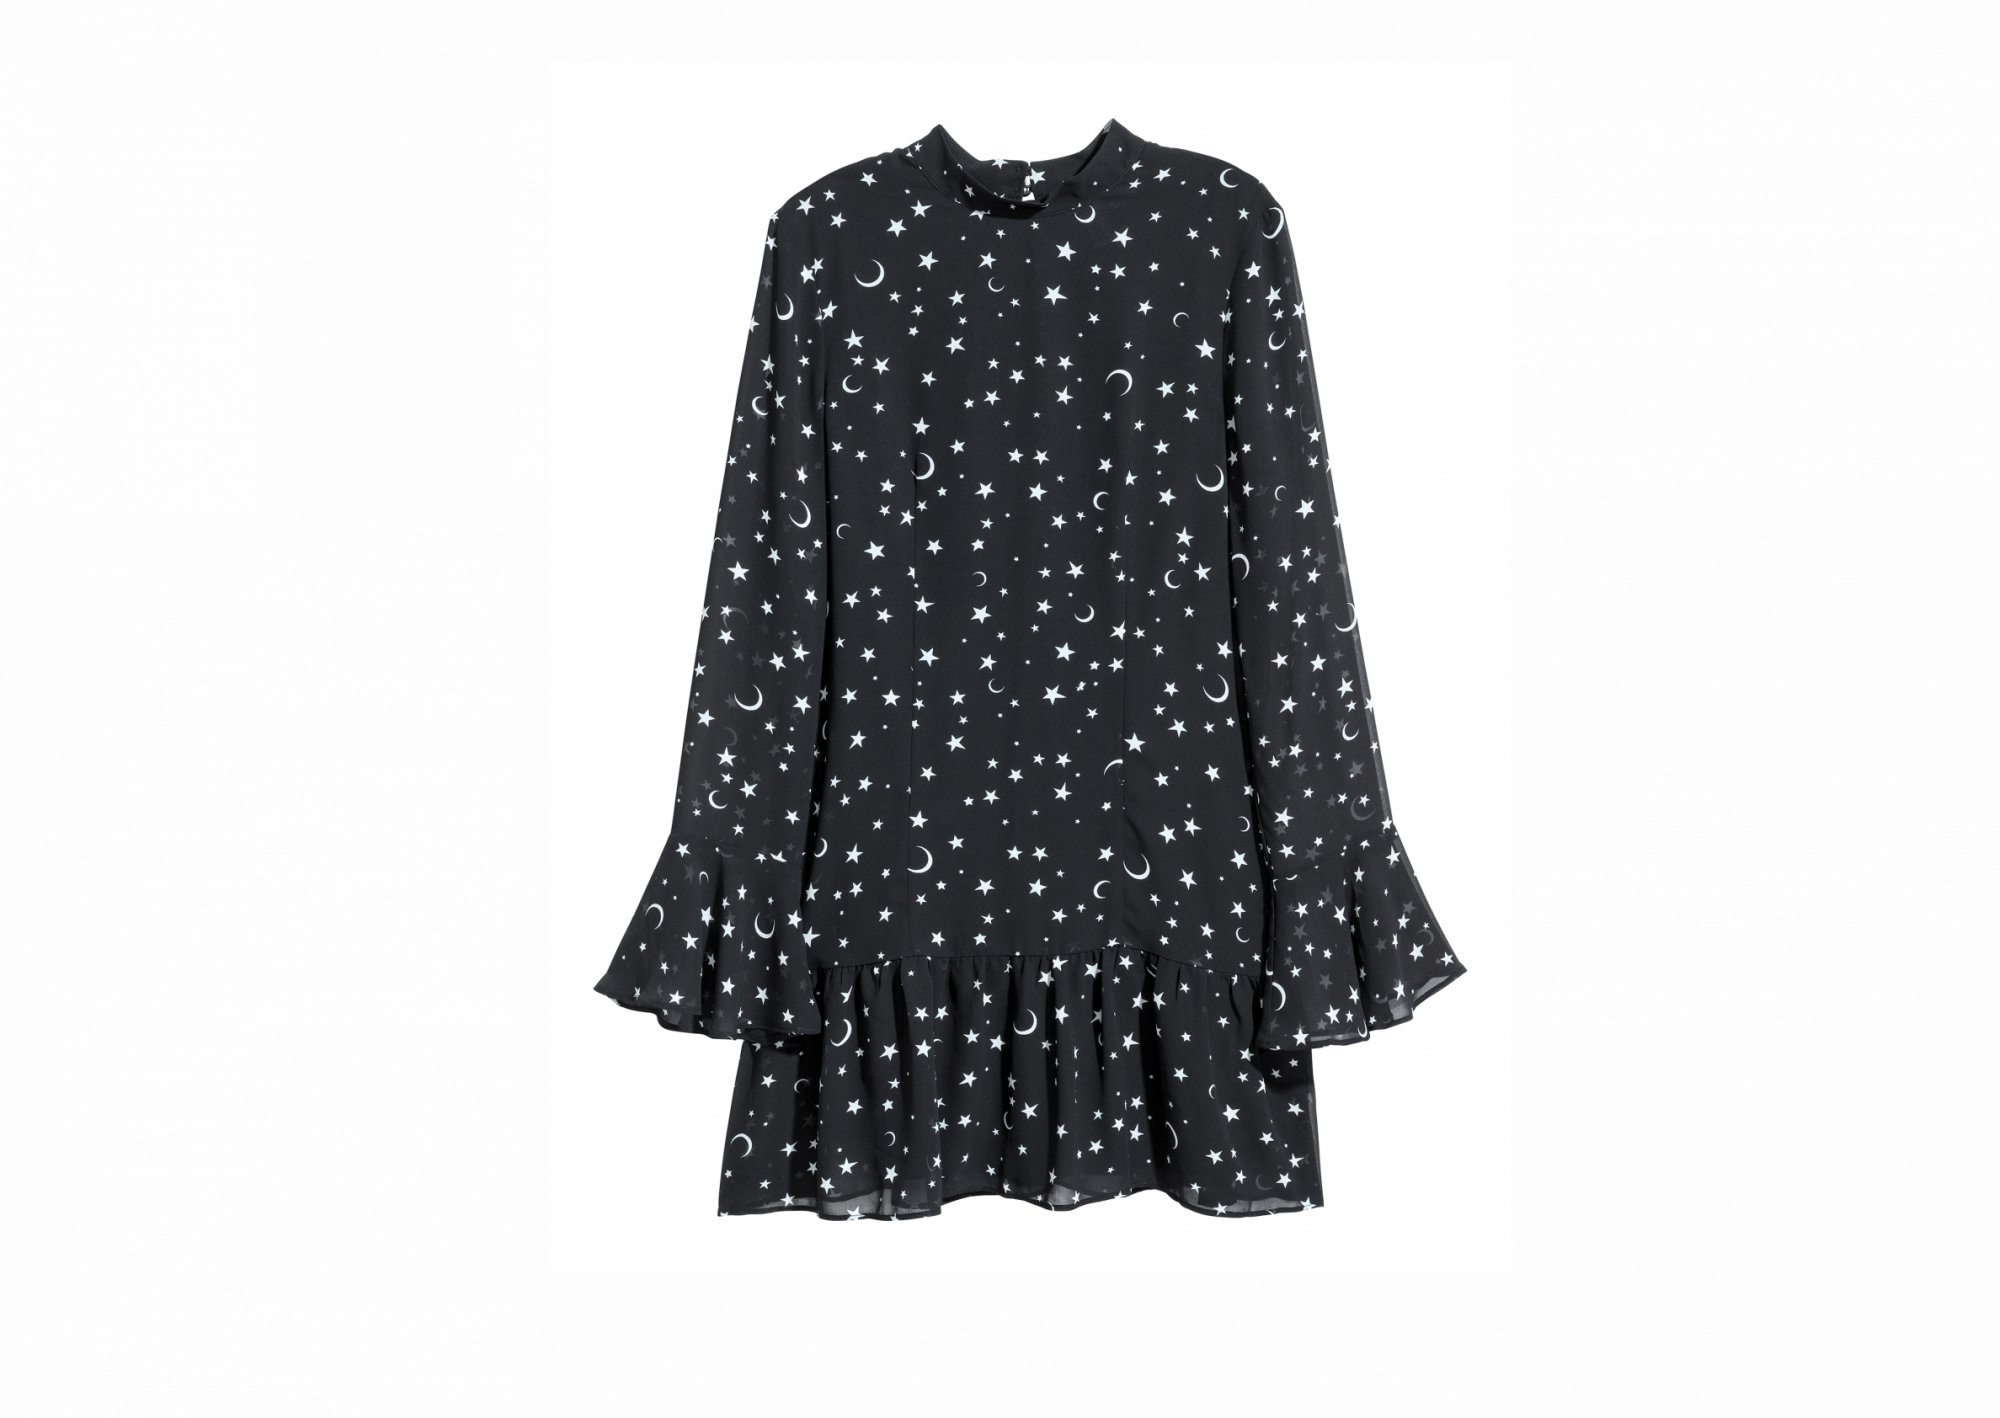 black blouse printed stars and white moons